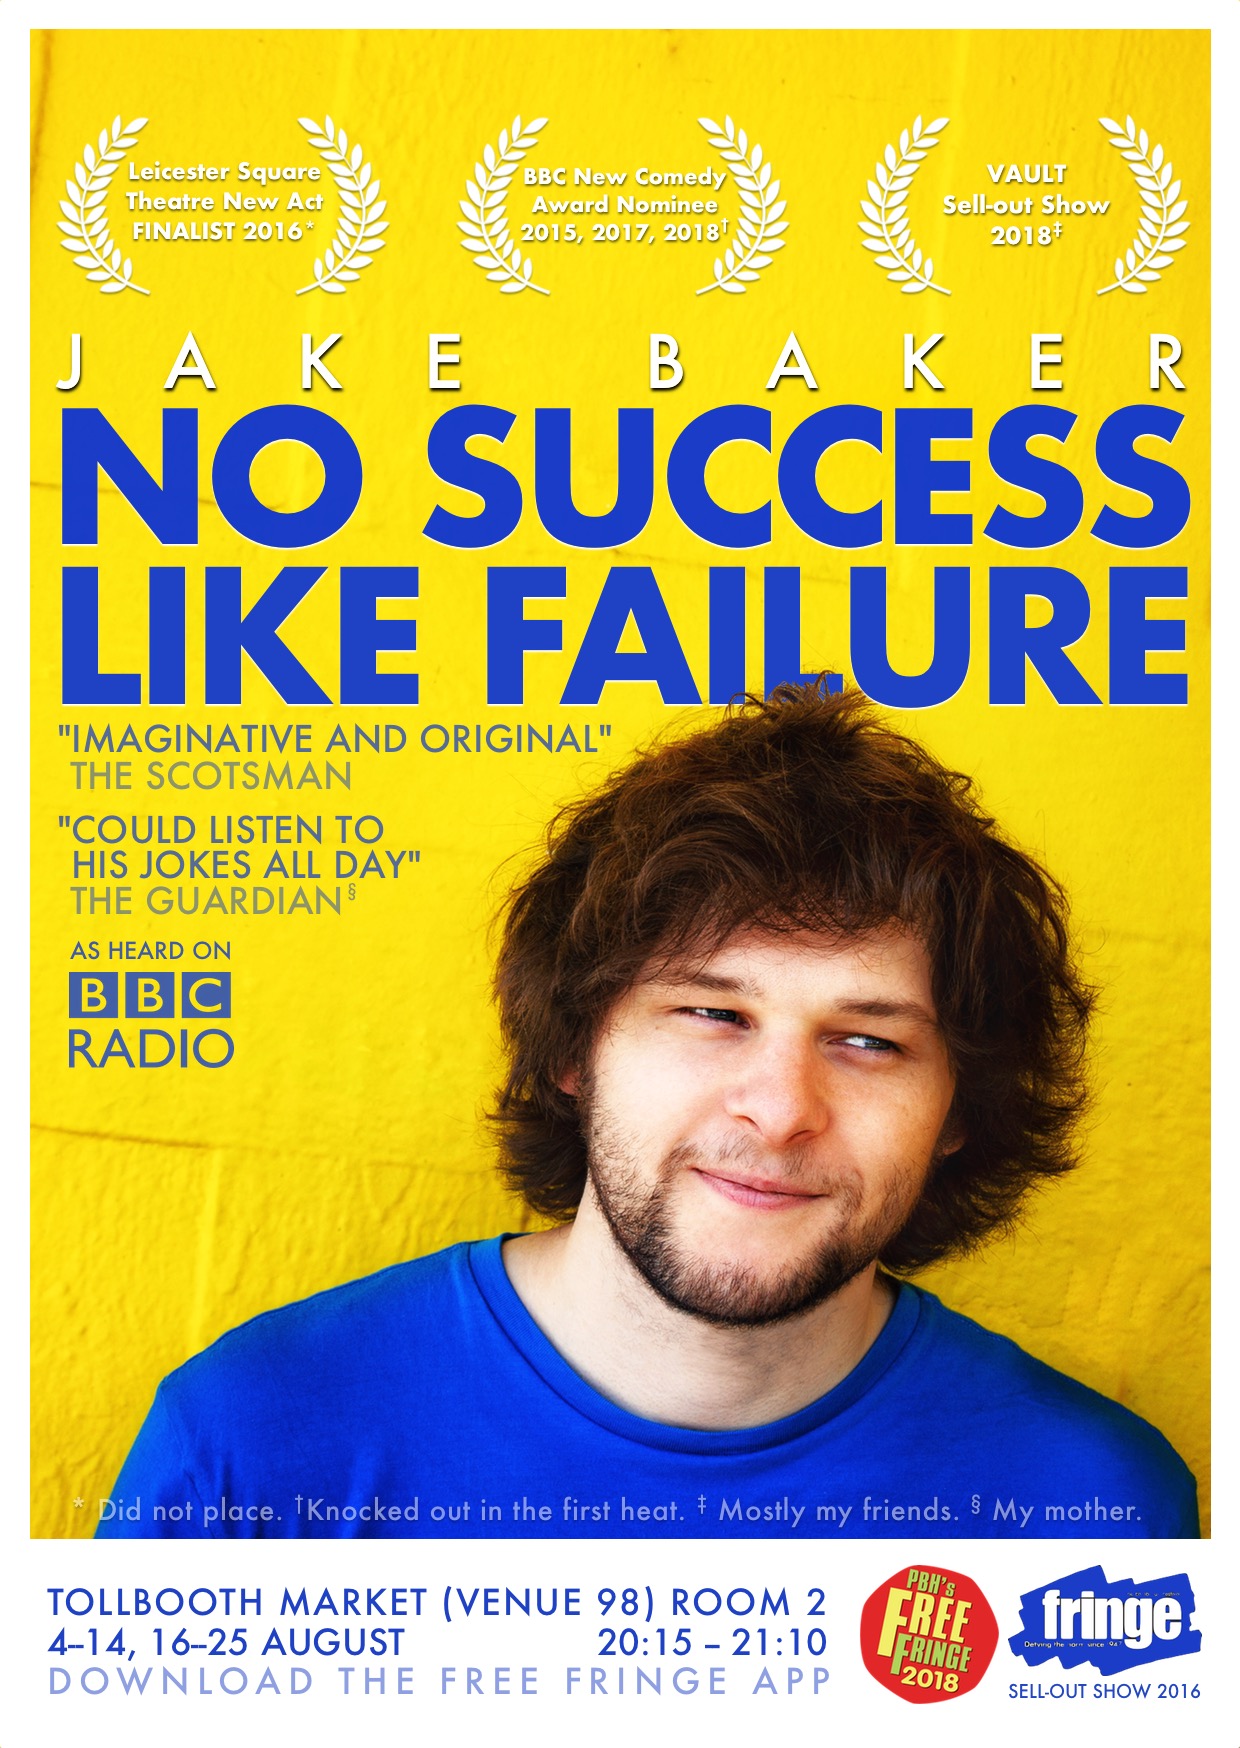 The poster for No Success Like Failure